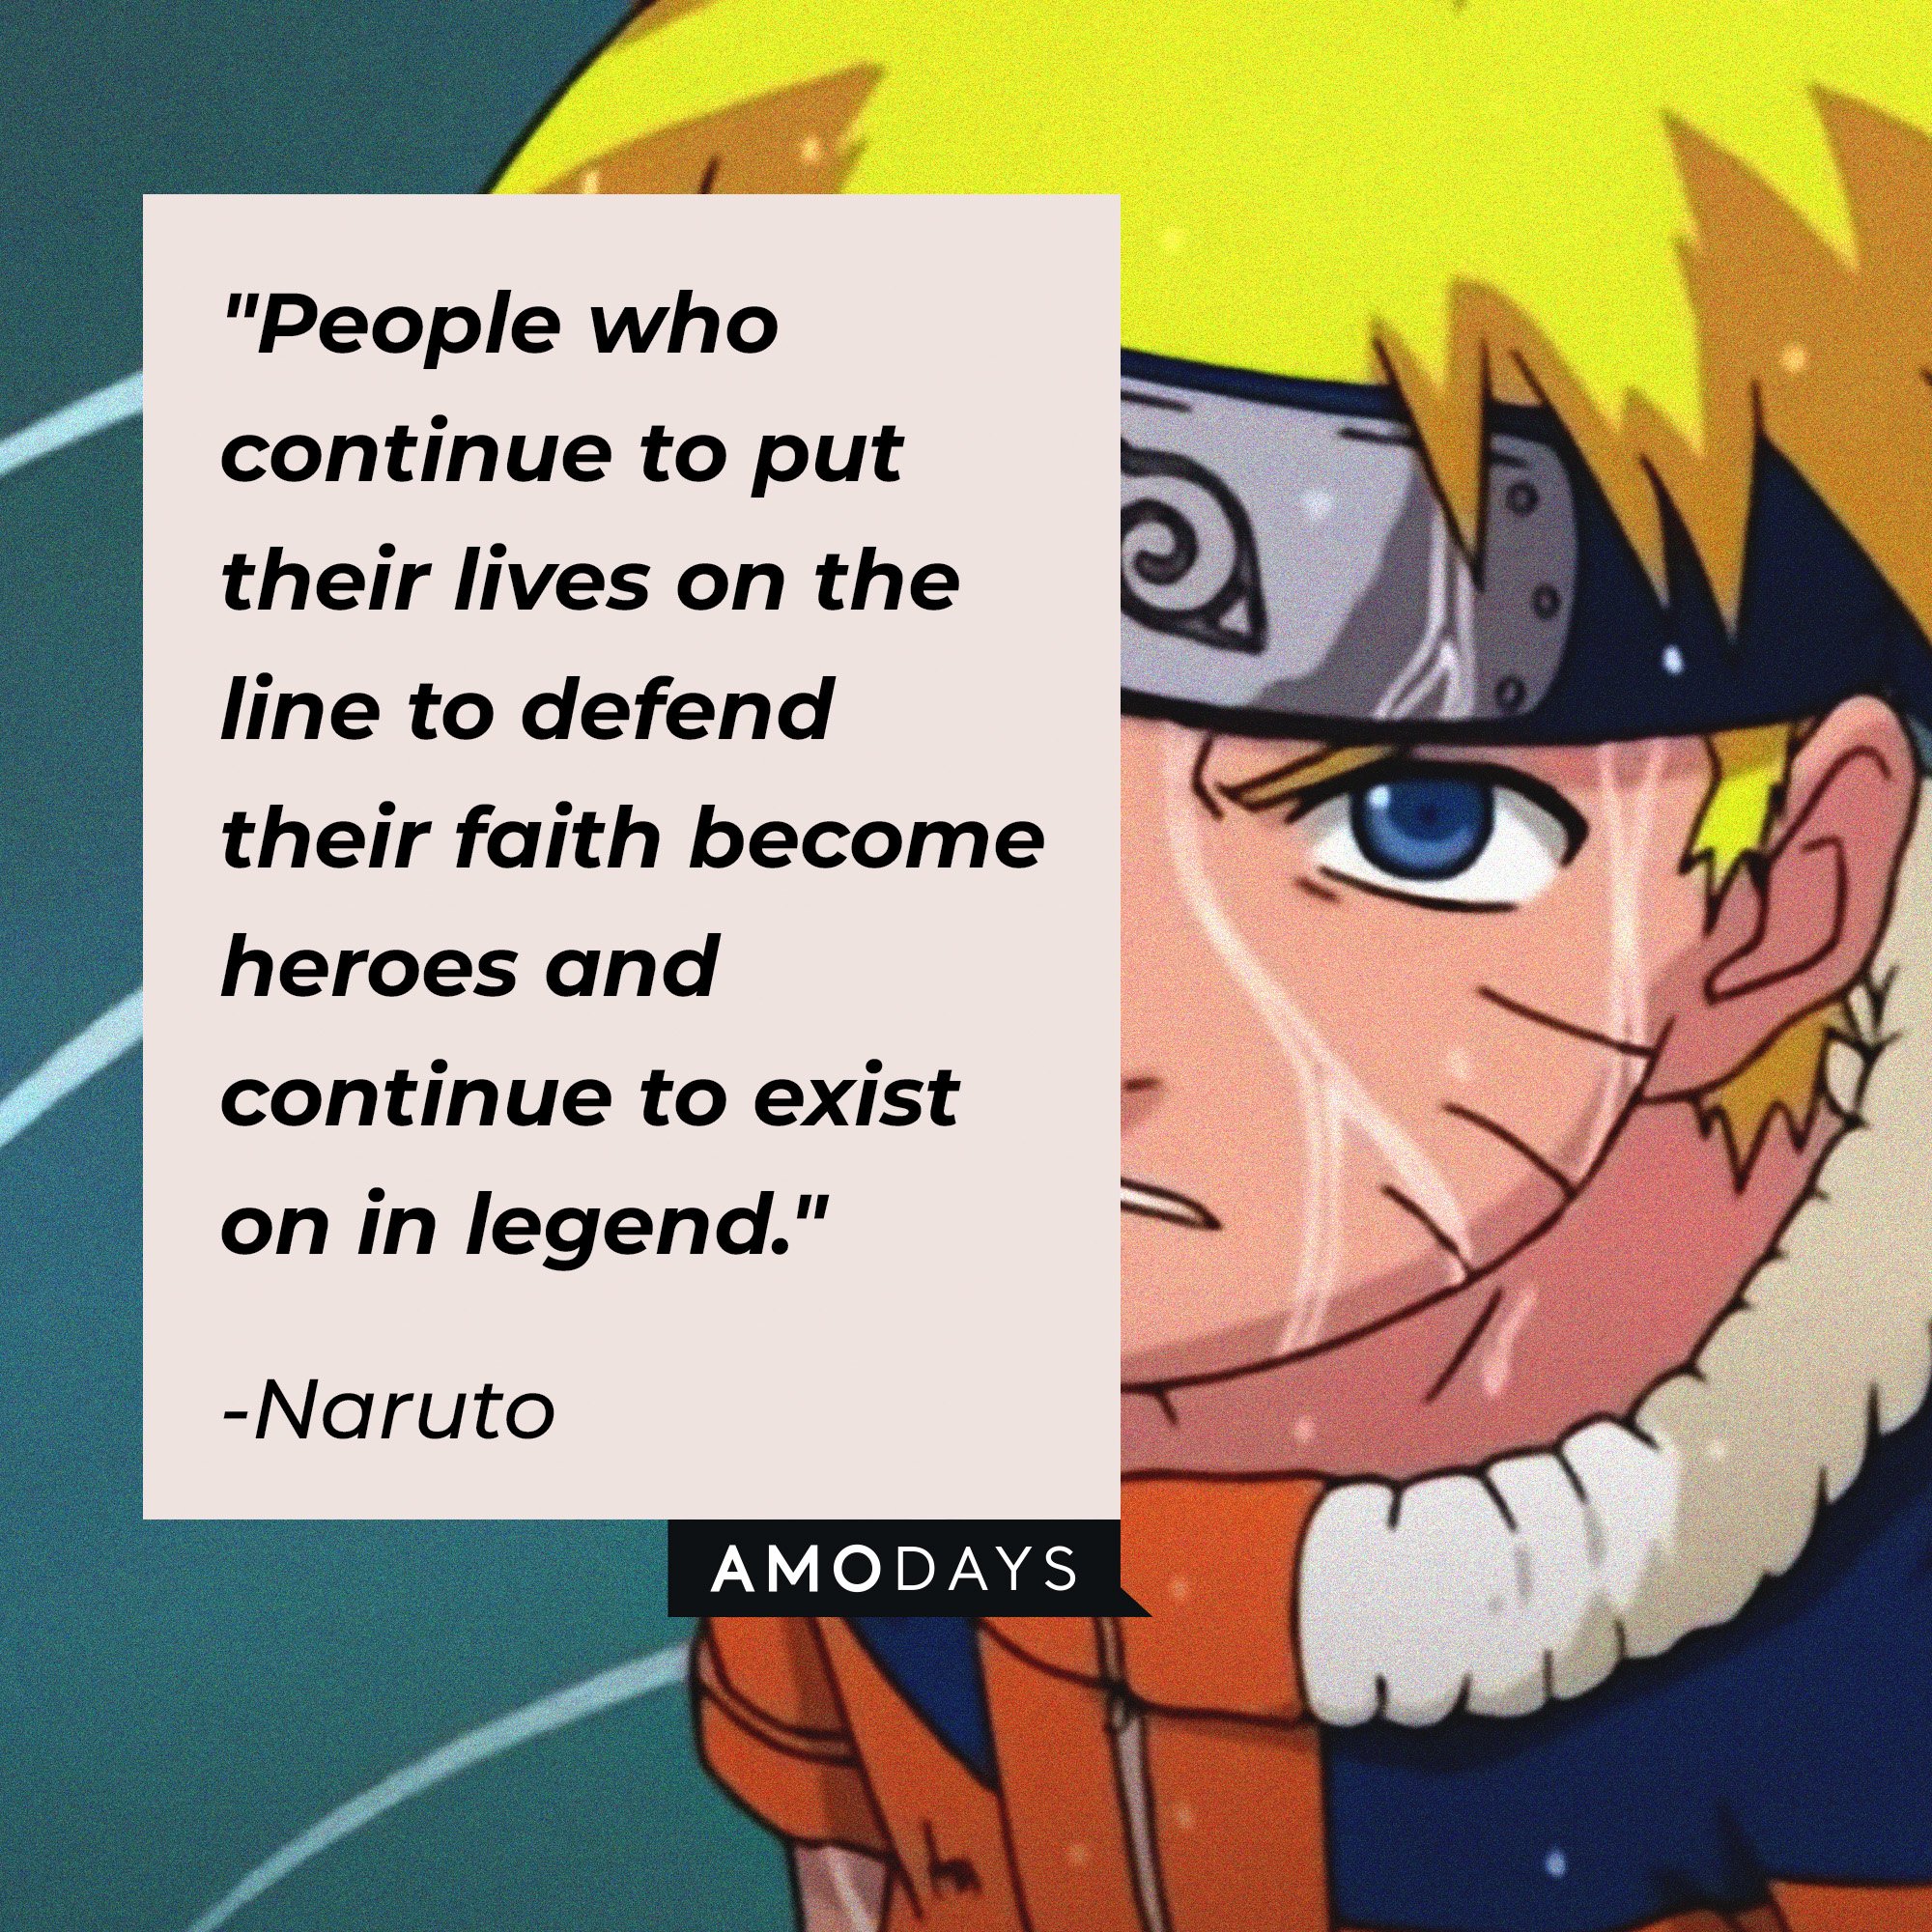  Naruto's quote: People who continue to put their lives on the line to defend their faith become heroes and continue to exist on in legend." | Image: AmoDays